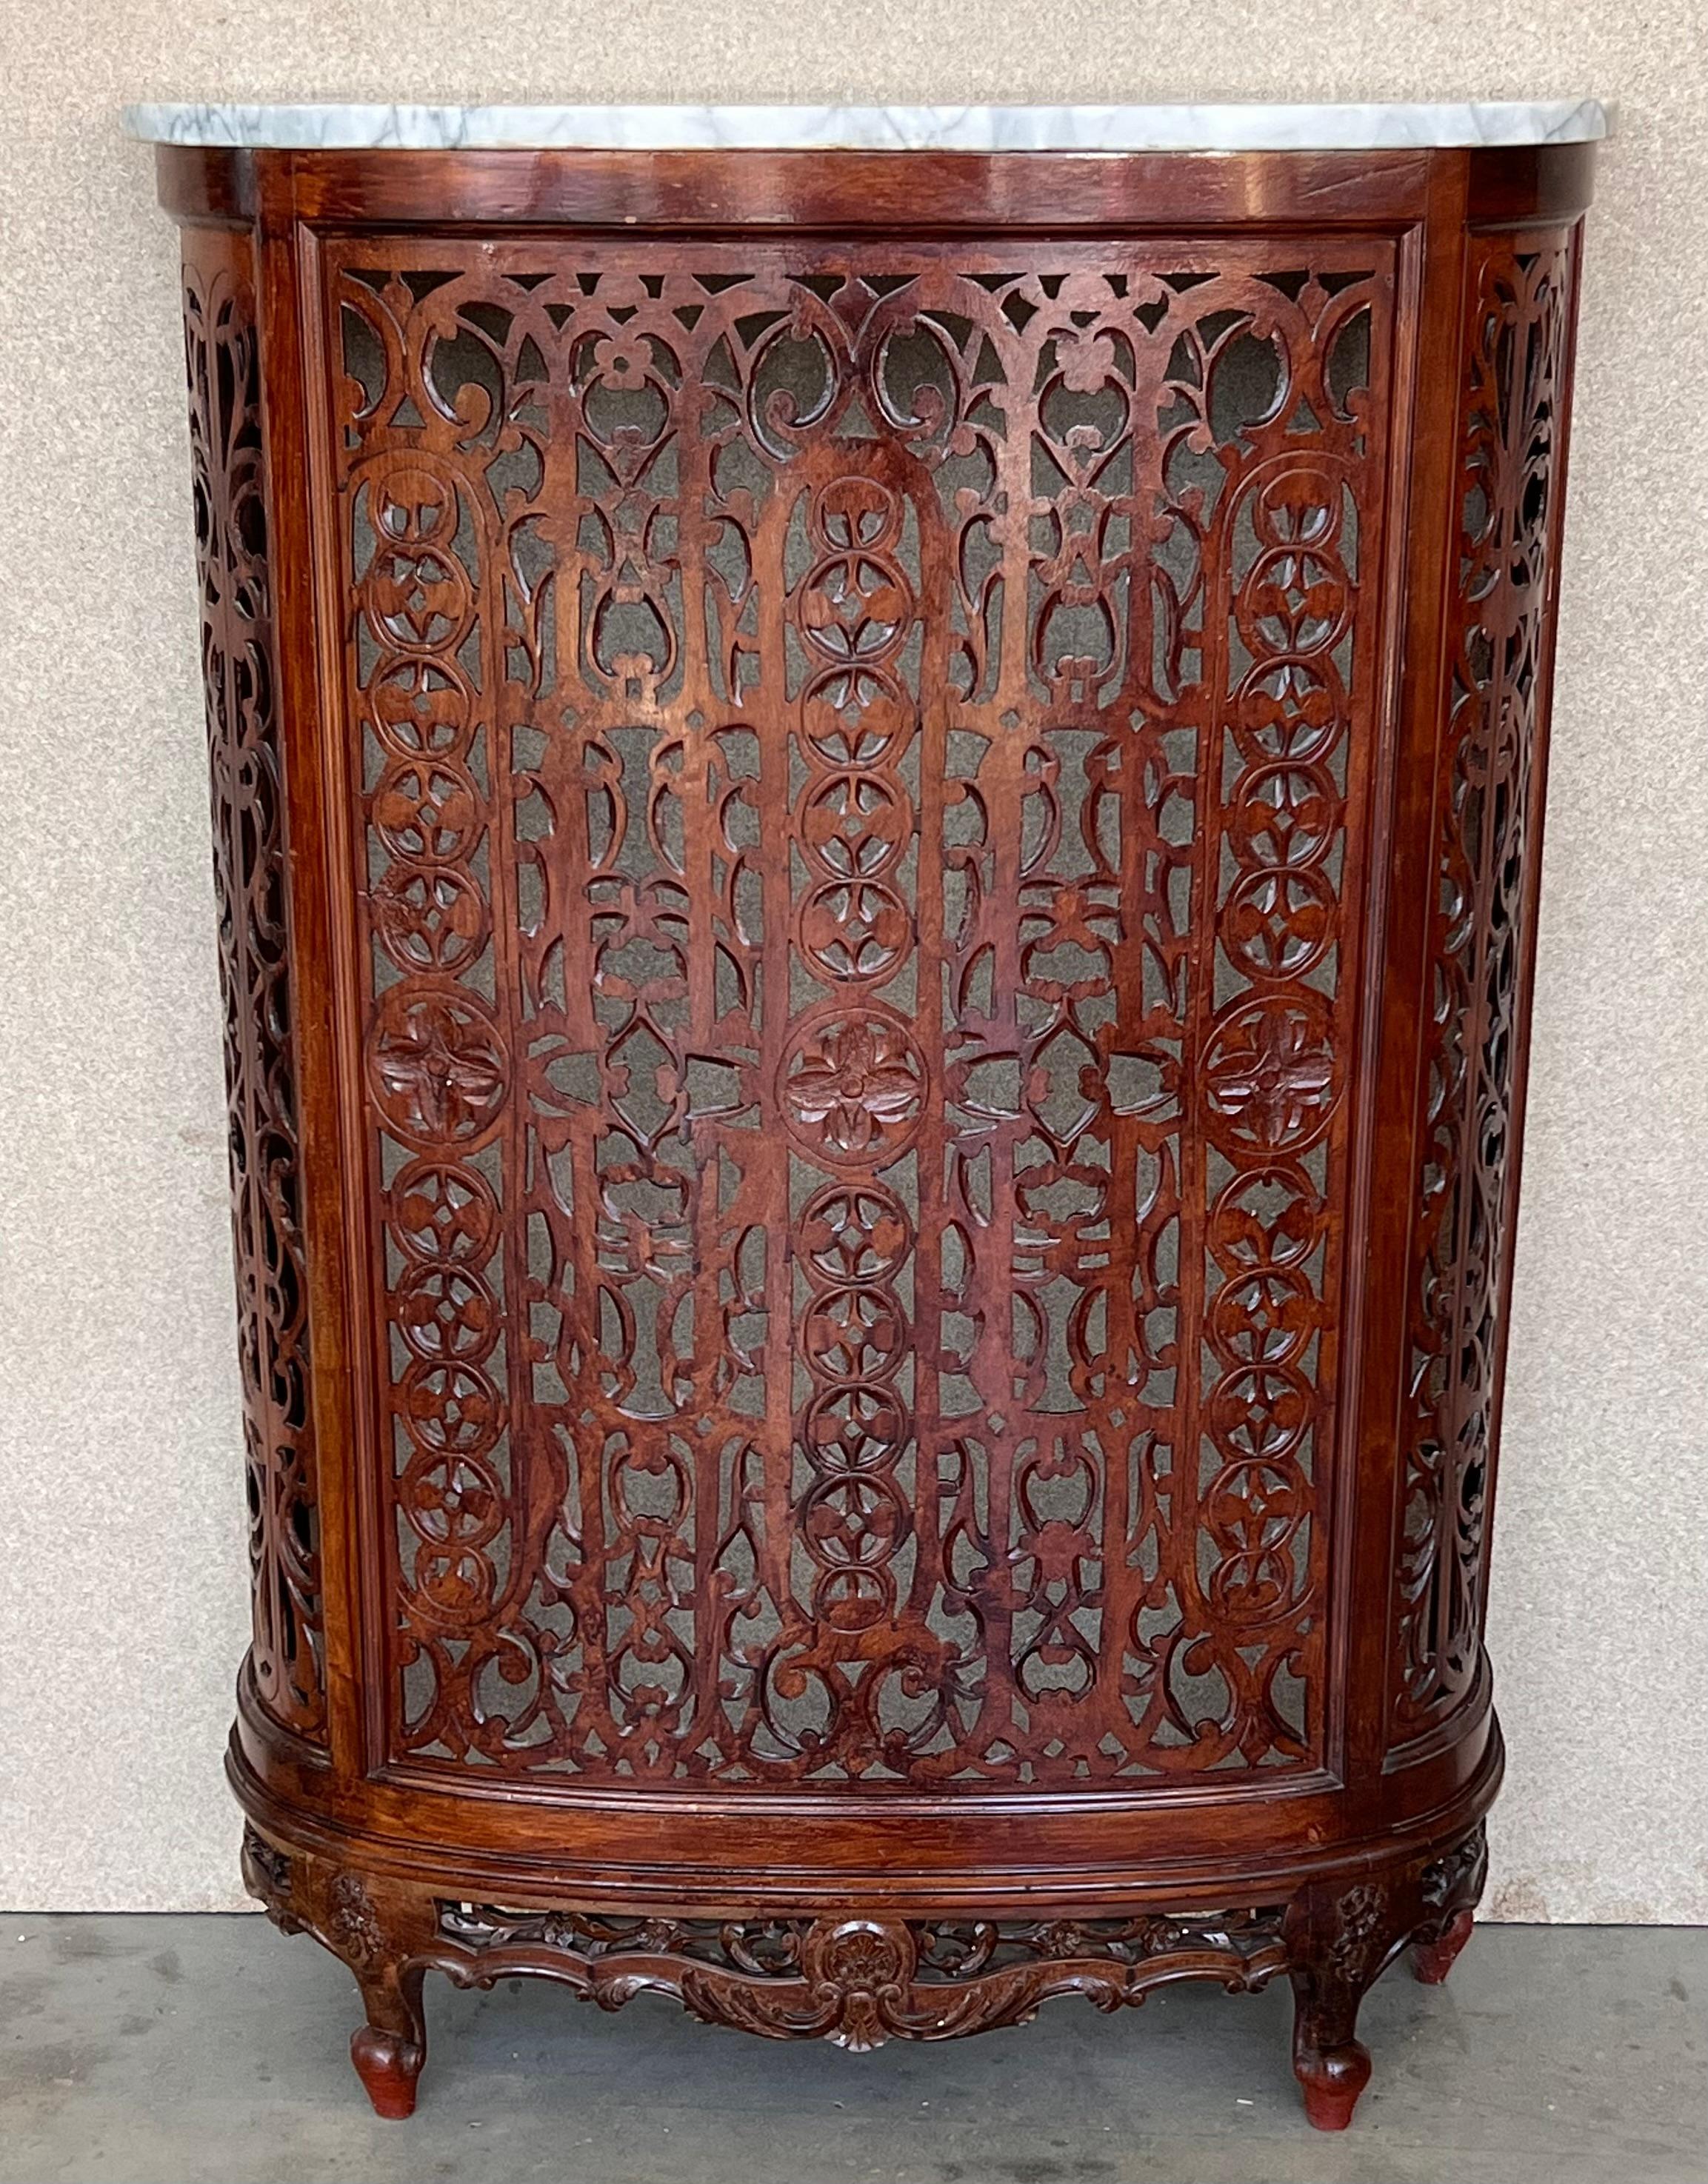 Art Nouveau Louis XV Style Carved Walnut and Marble Top Console Table or Radiator Cover For Sale